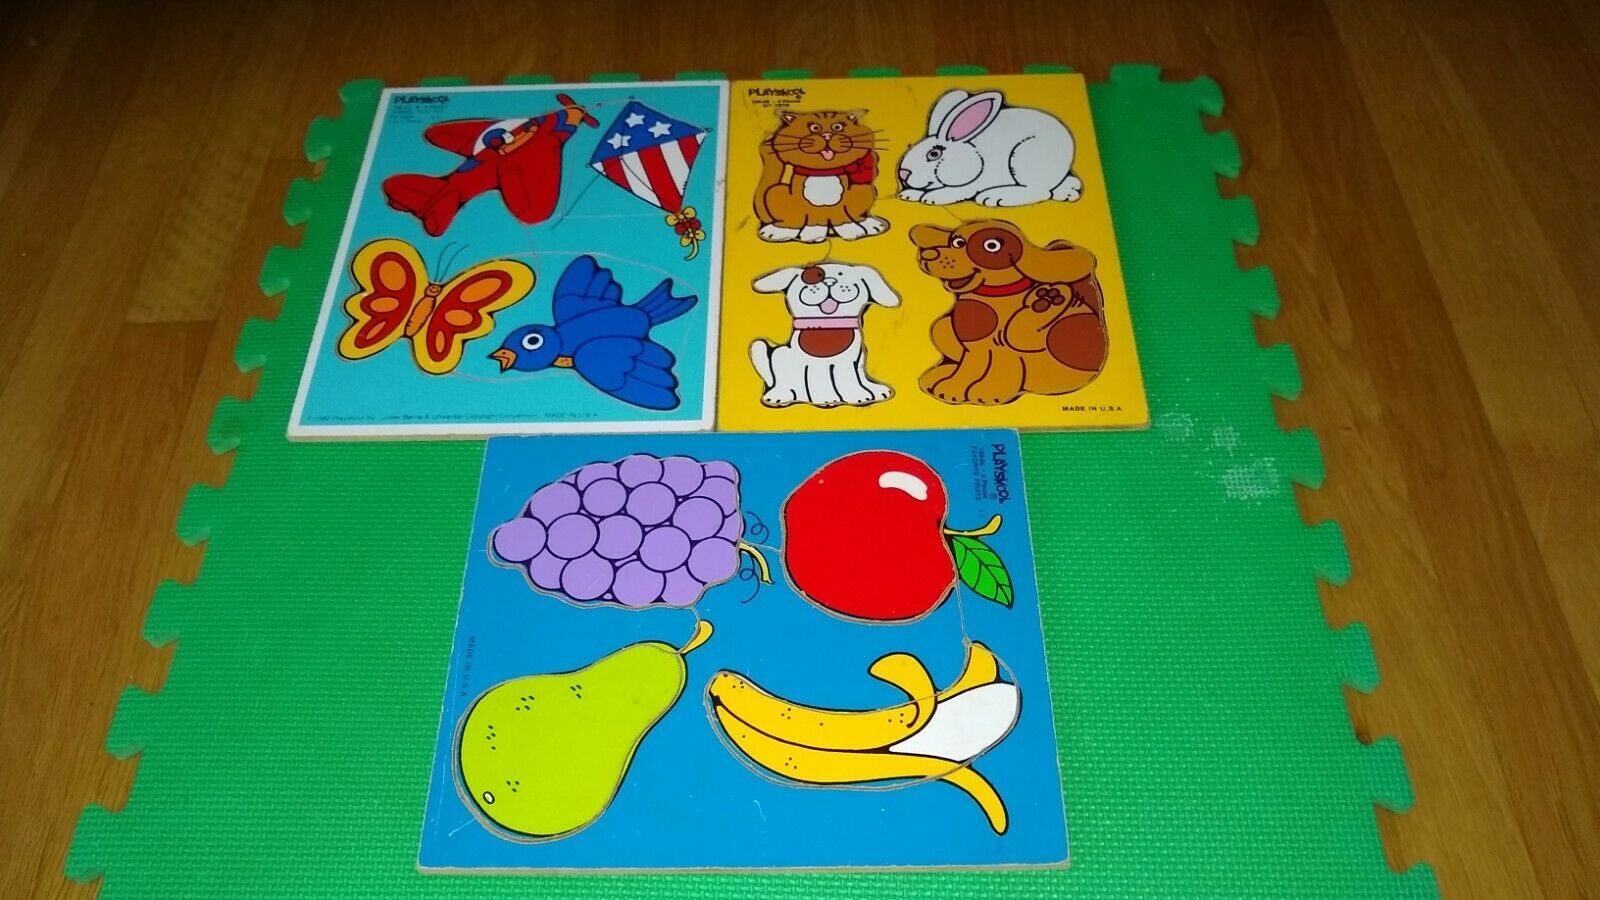 Vintage Playskool Wooden Puzzles: My Pets, Fruits, Things that Fly,  4 Pieces - $40.00